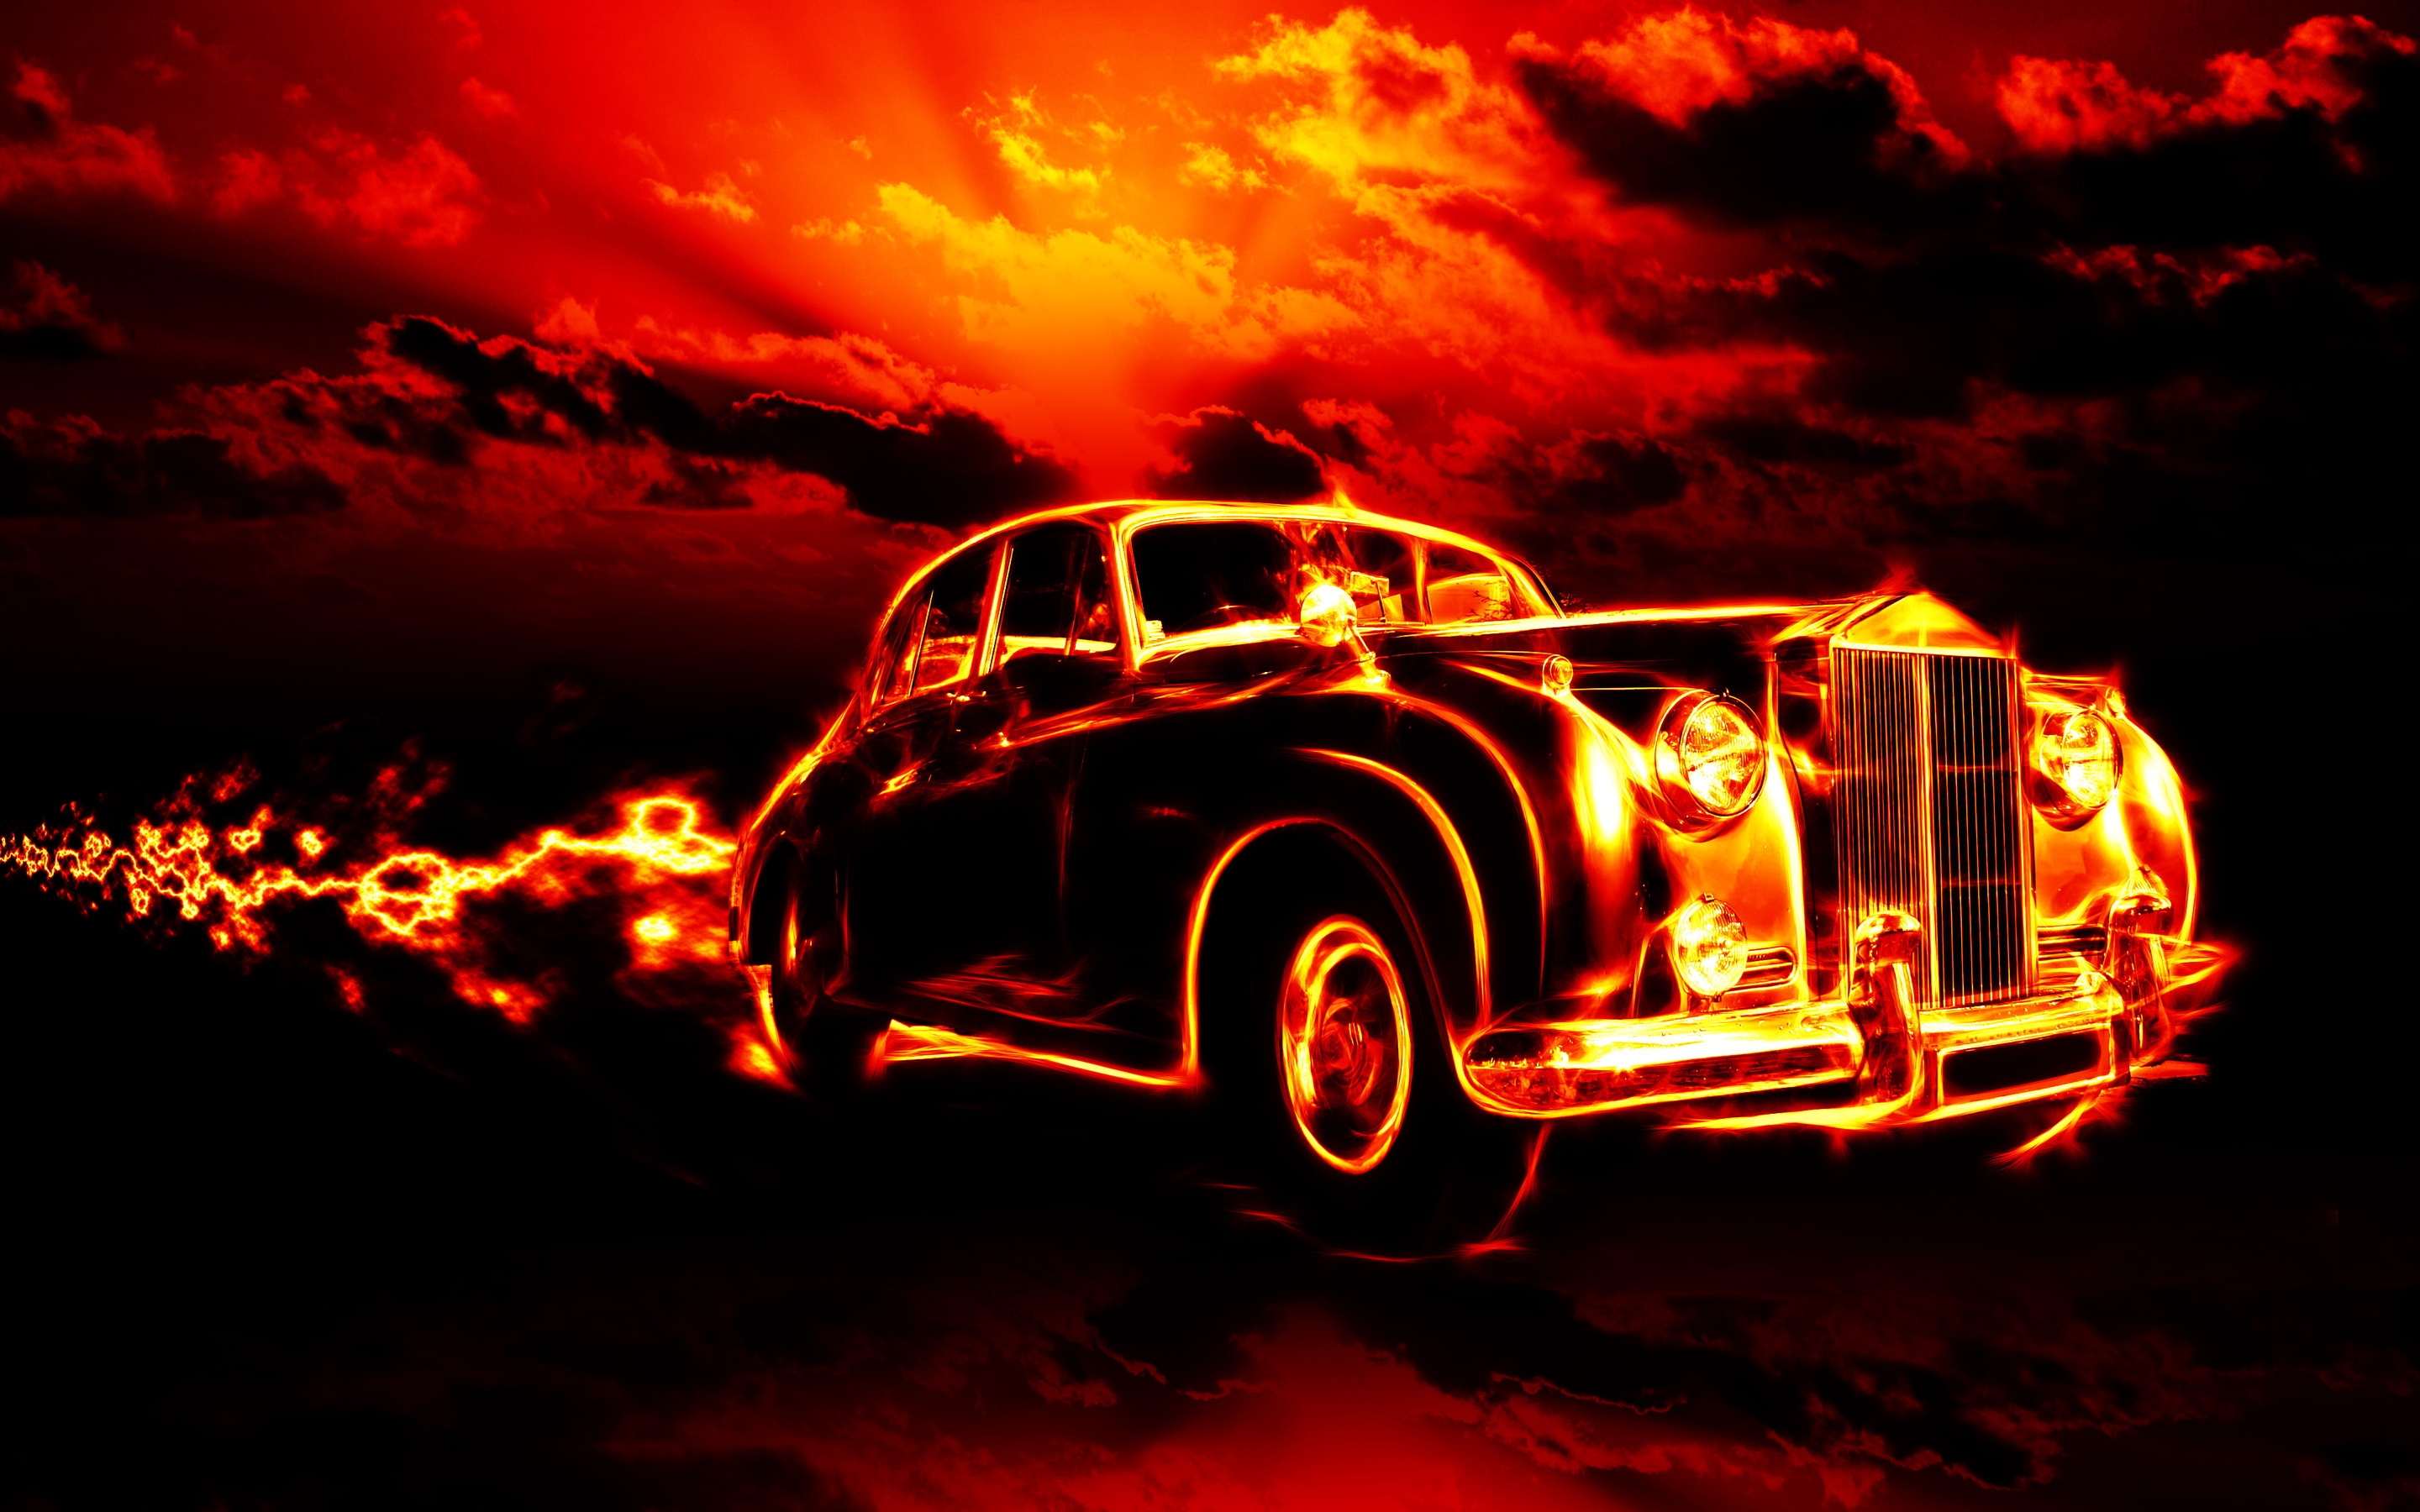 Vintage Car in Fire for 2880 x 1800 Retina Display resolution